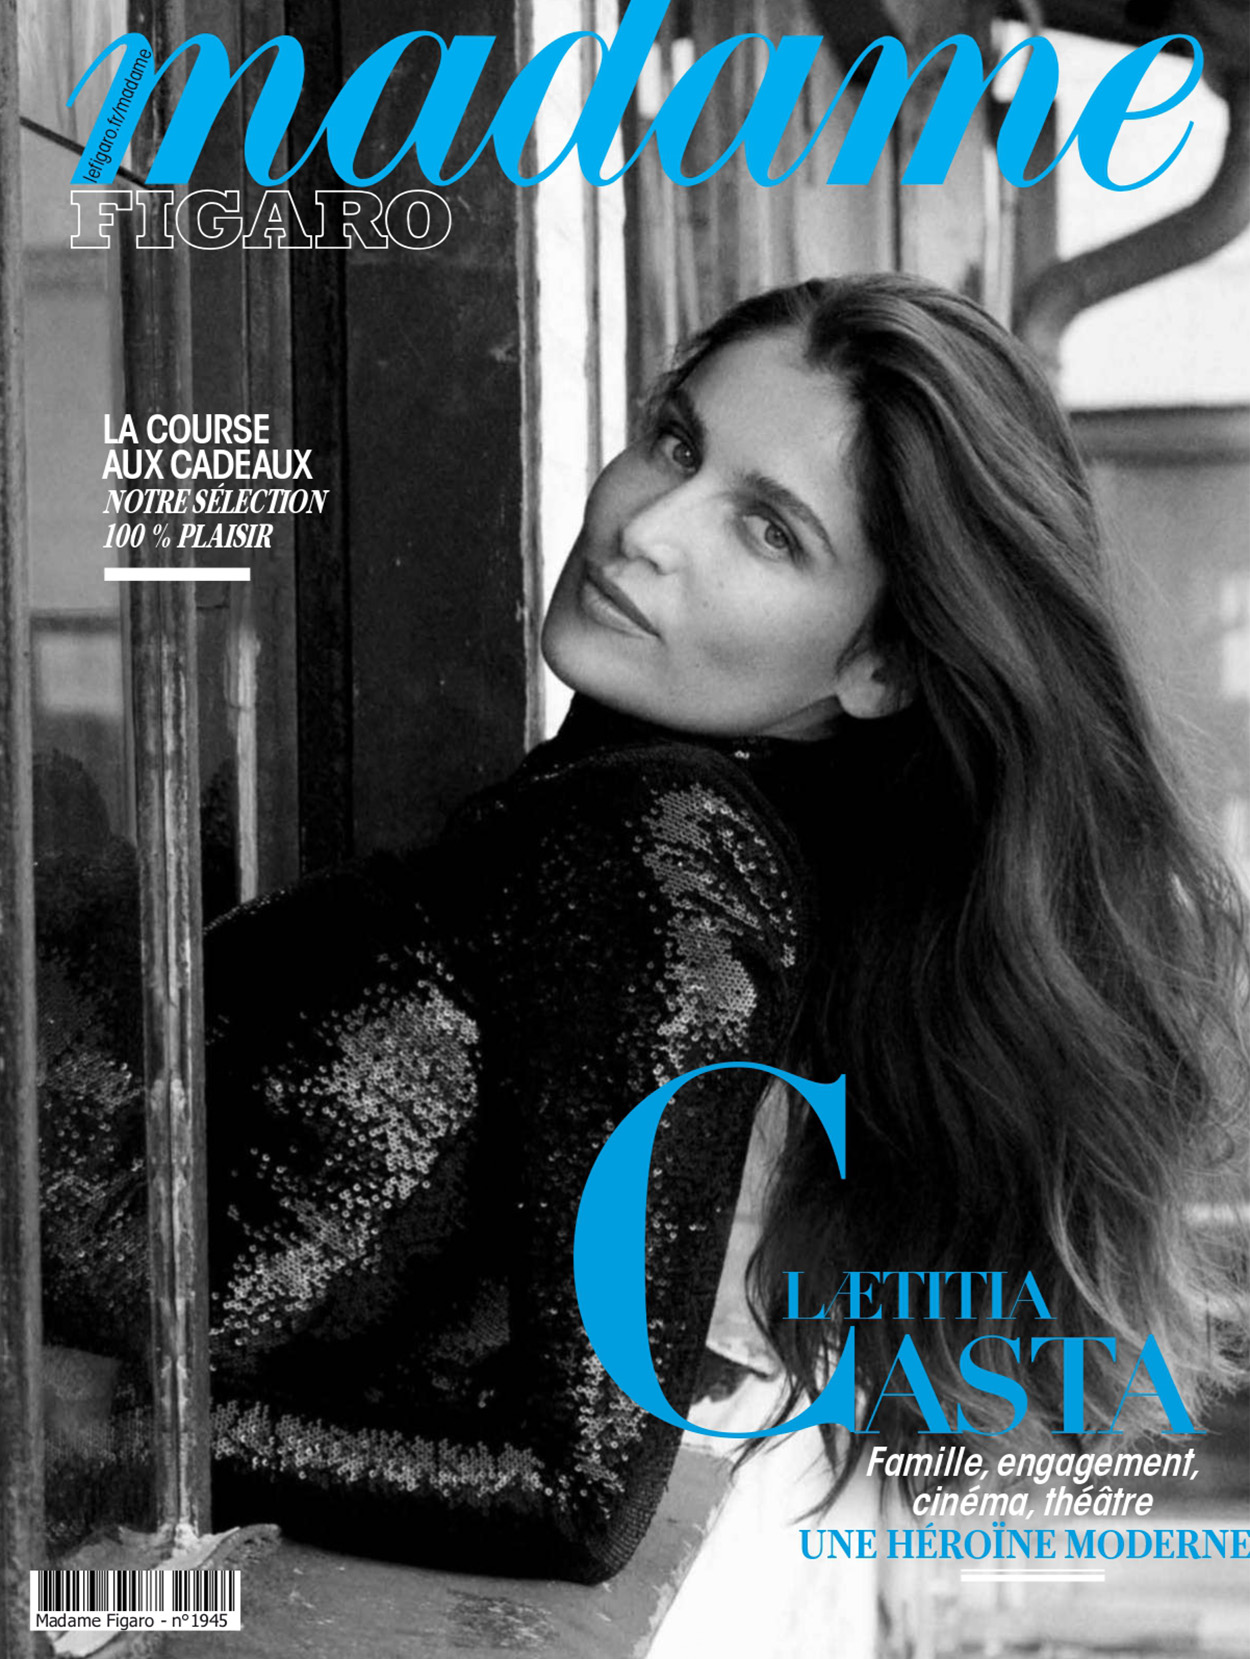 Laetitia Casta covers Madame Figaro December 3rd, 2021 by Philip Gay